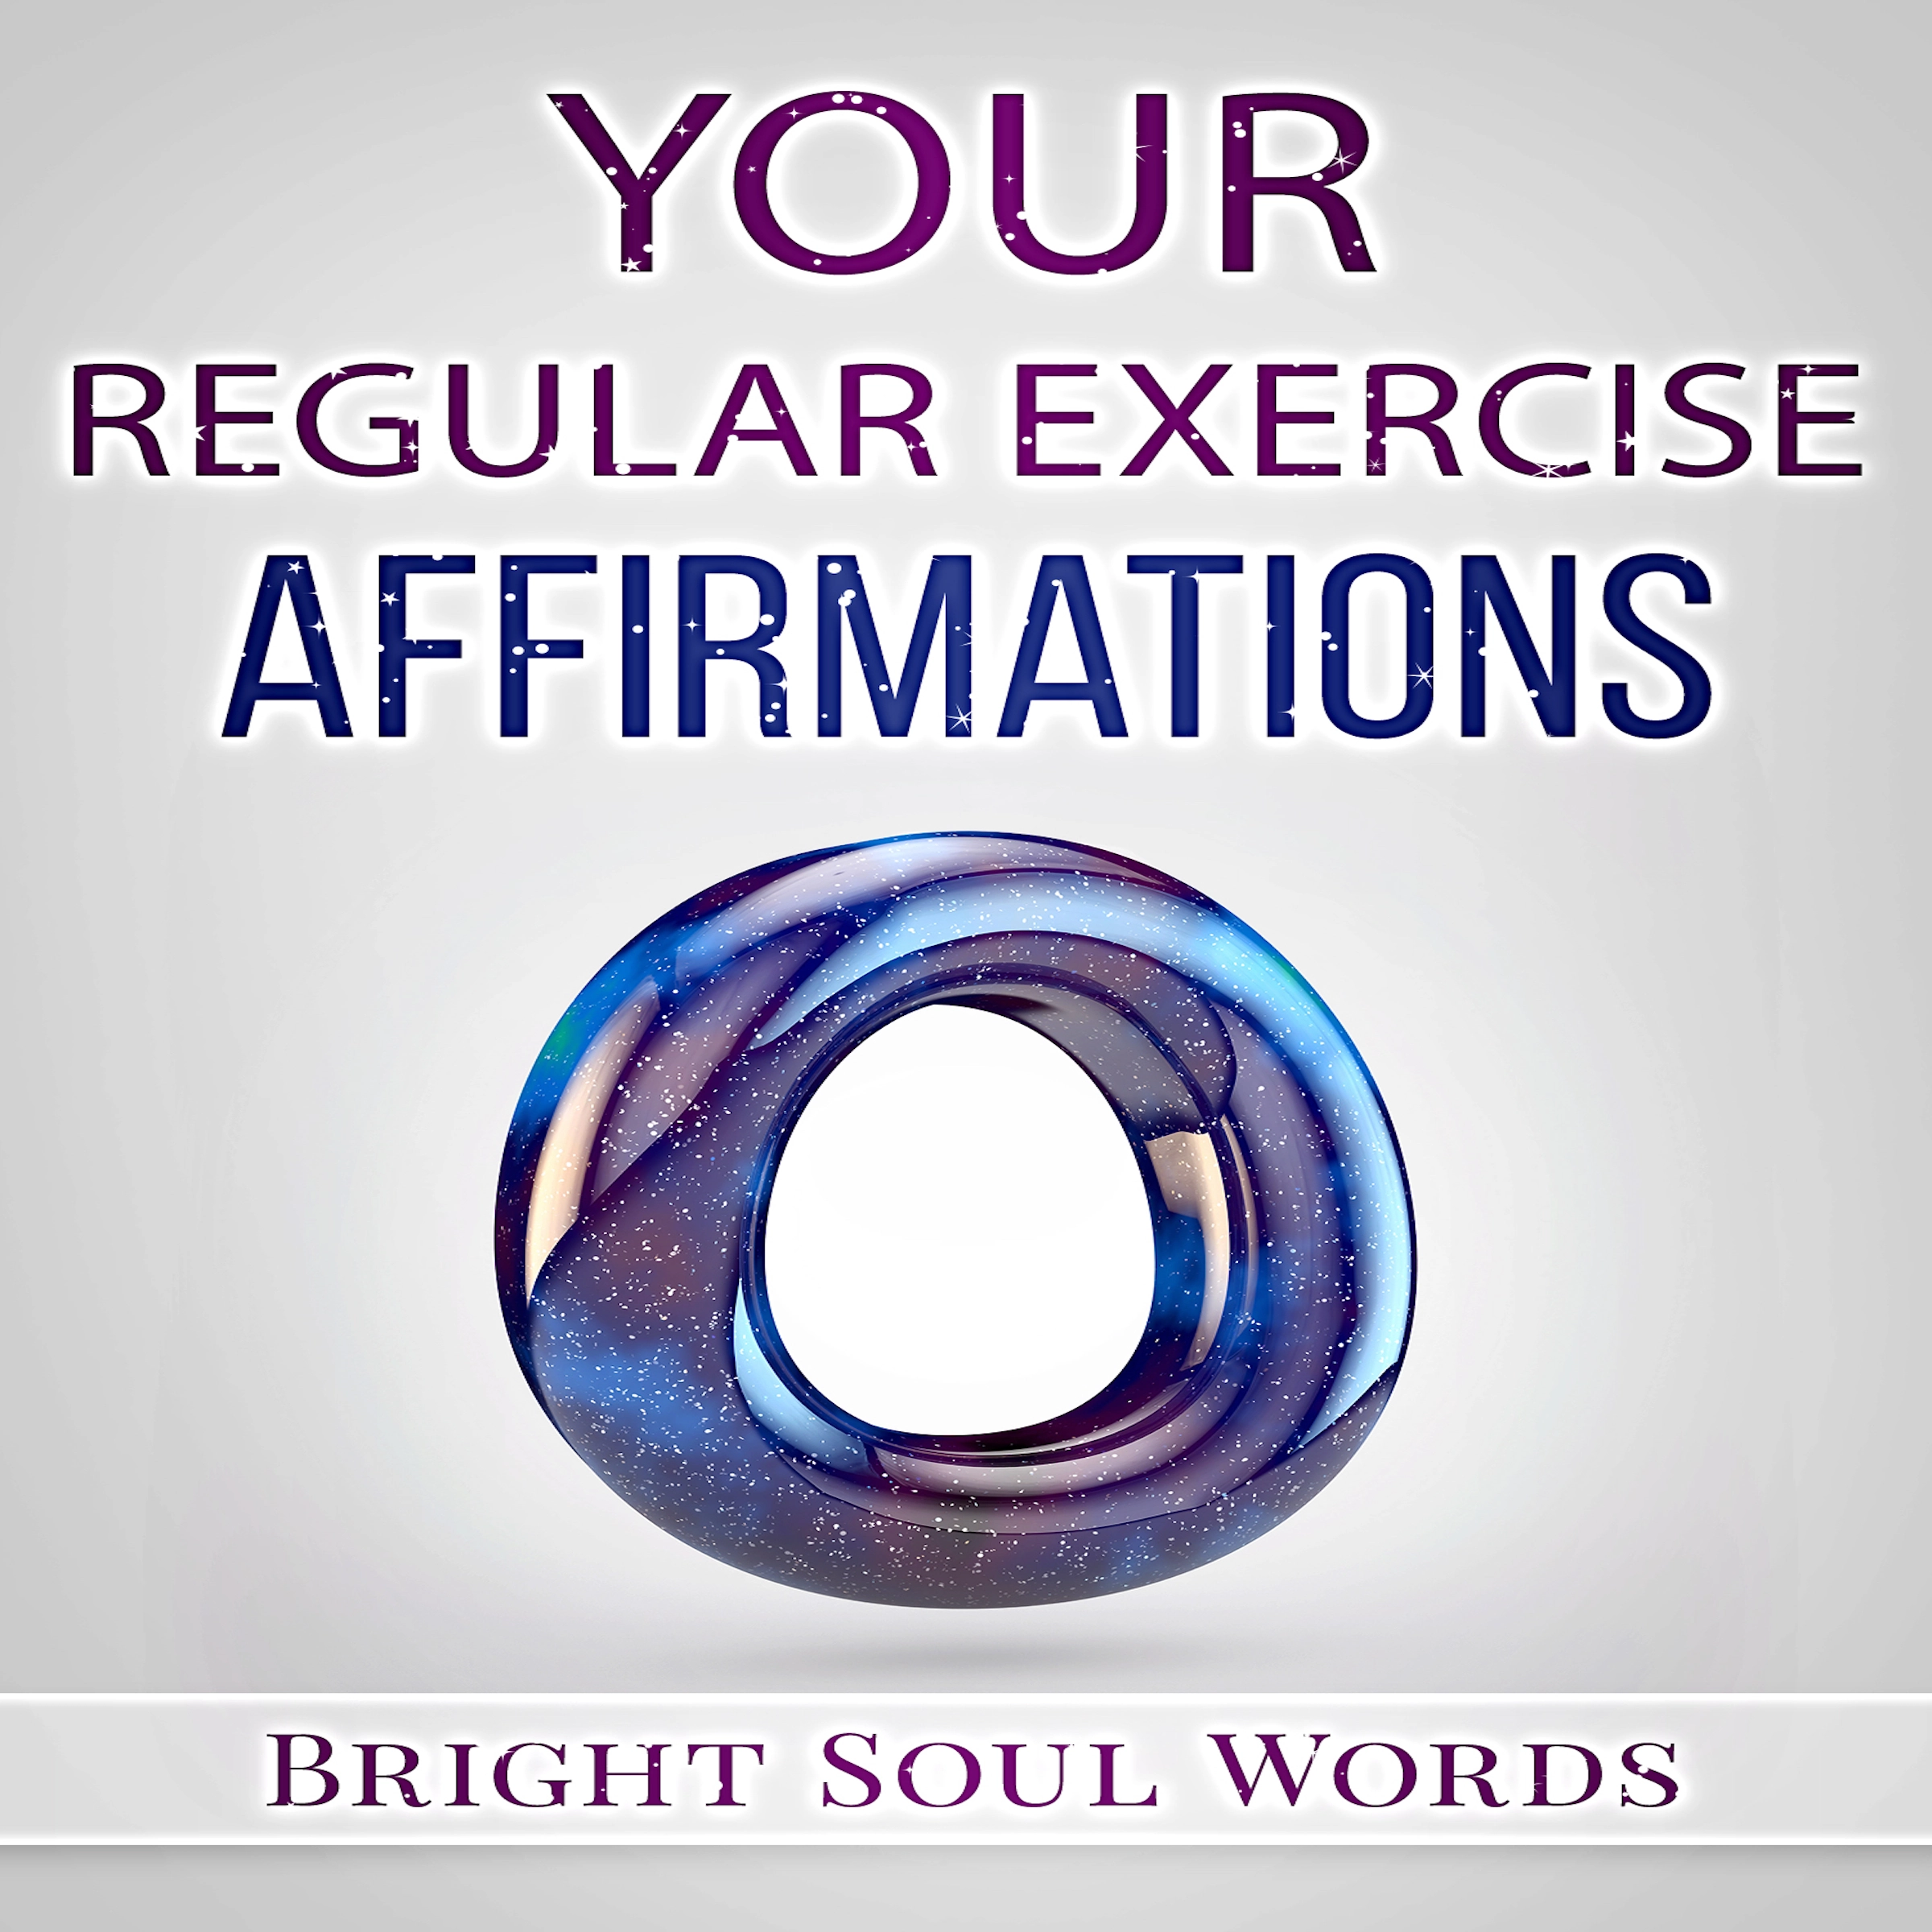 Your Regular Exercise Affirmations by Bright Soul Words Audiobook